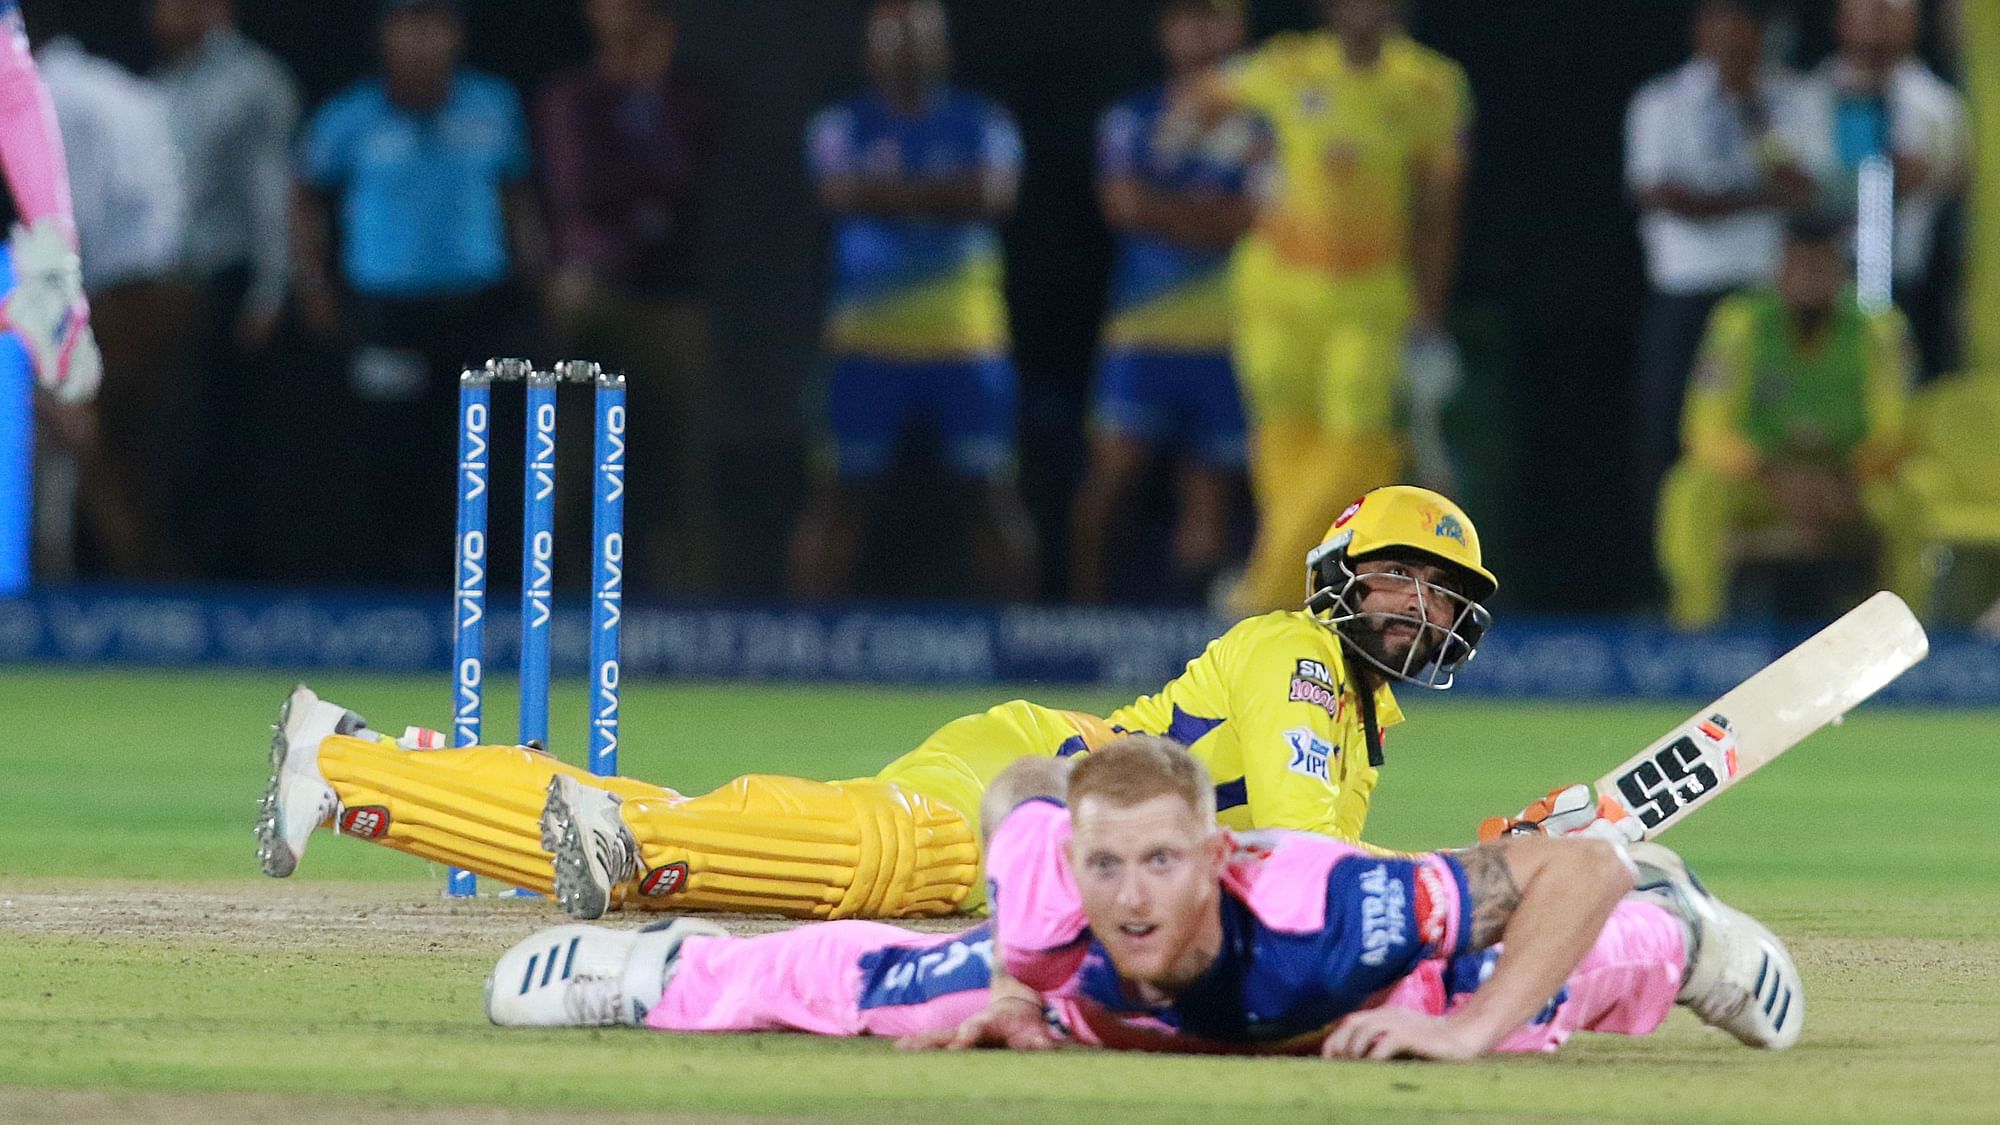 Ravindra Jadeja of CSK falls on the ground after playing a shot during match 25 of the Vivo Indian Premier League.